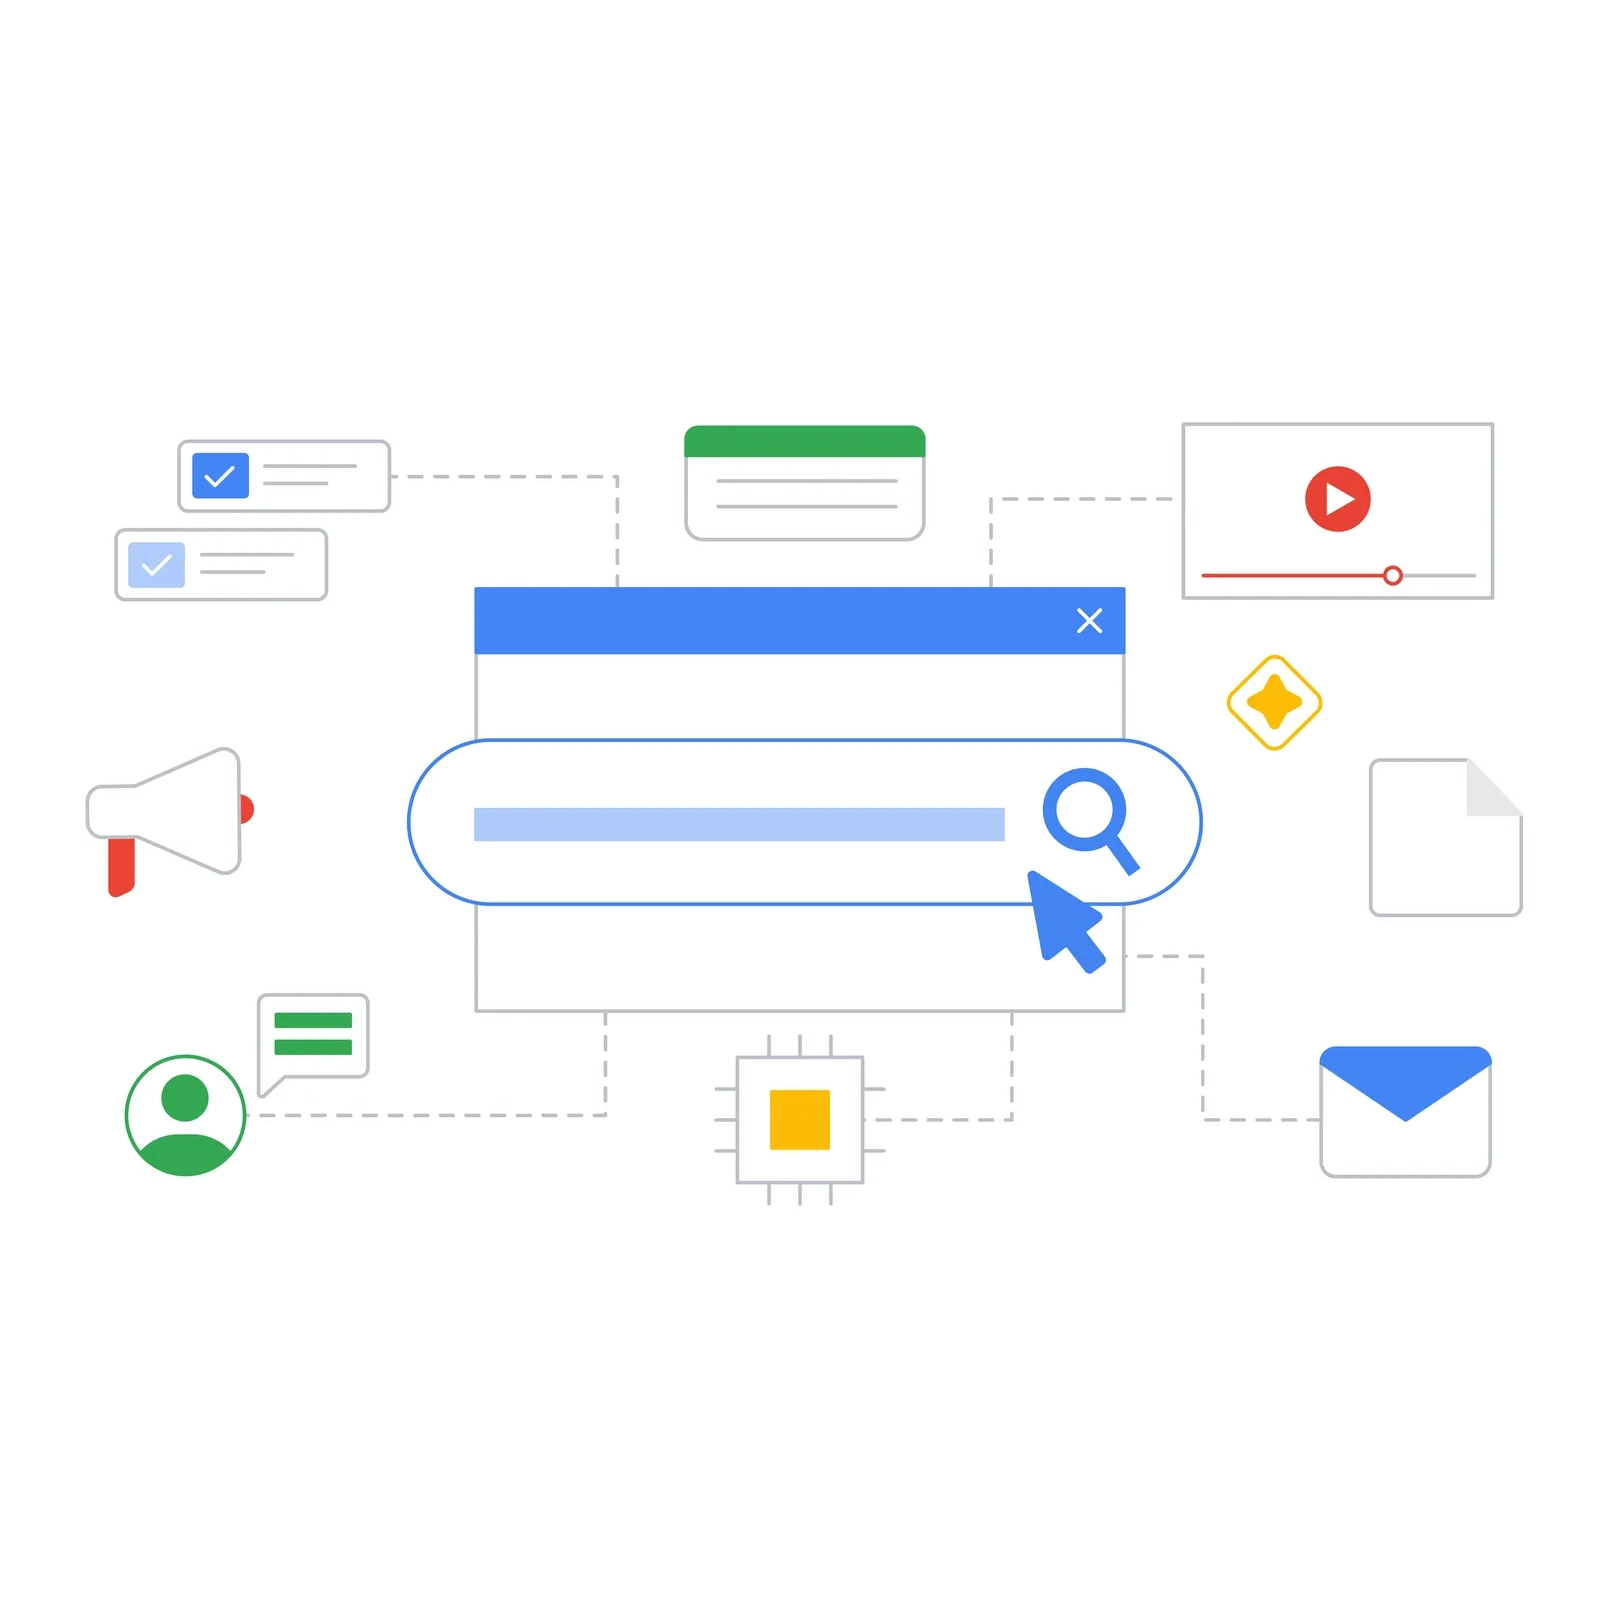 Illustration of a search bar surrounded by icons representing online activities: video, email, messaging, documents, and megaphone.